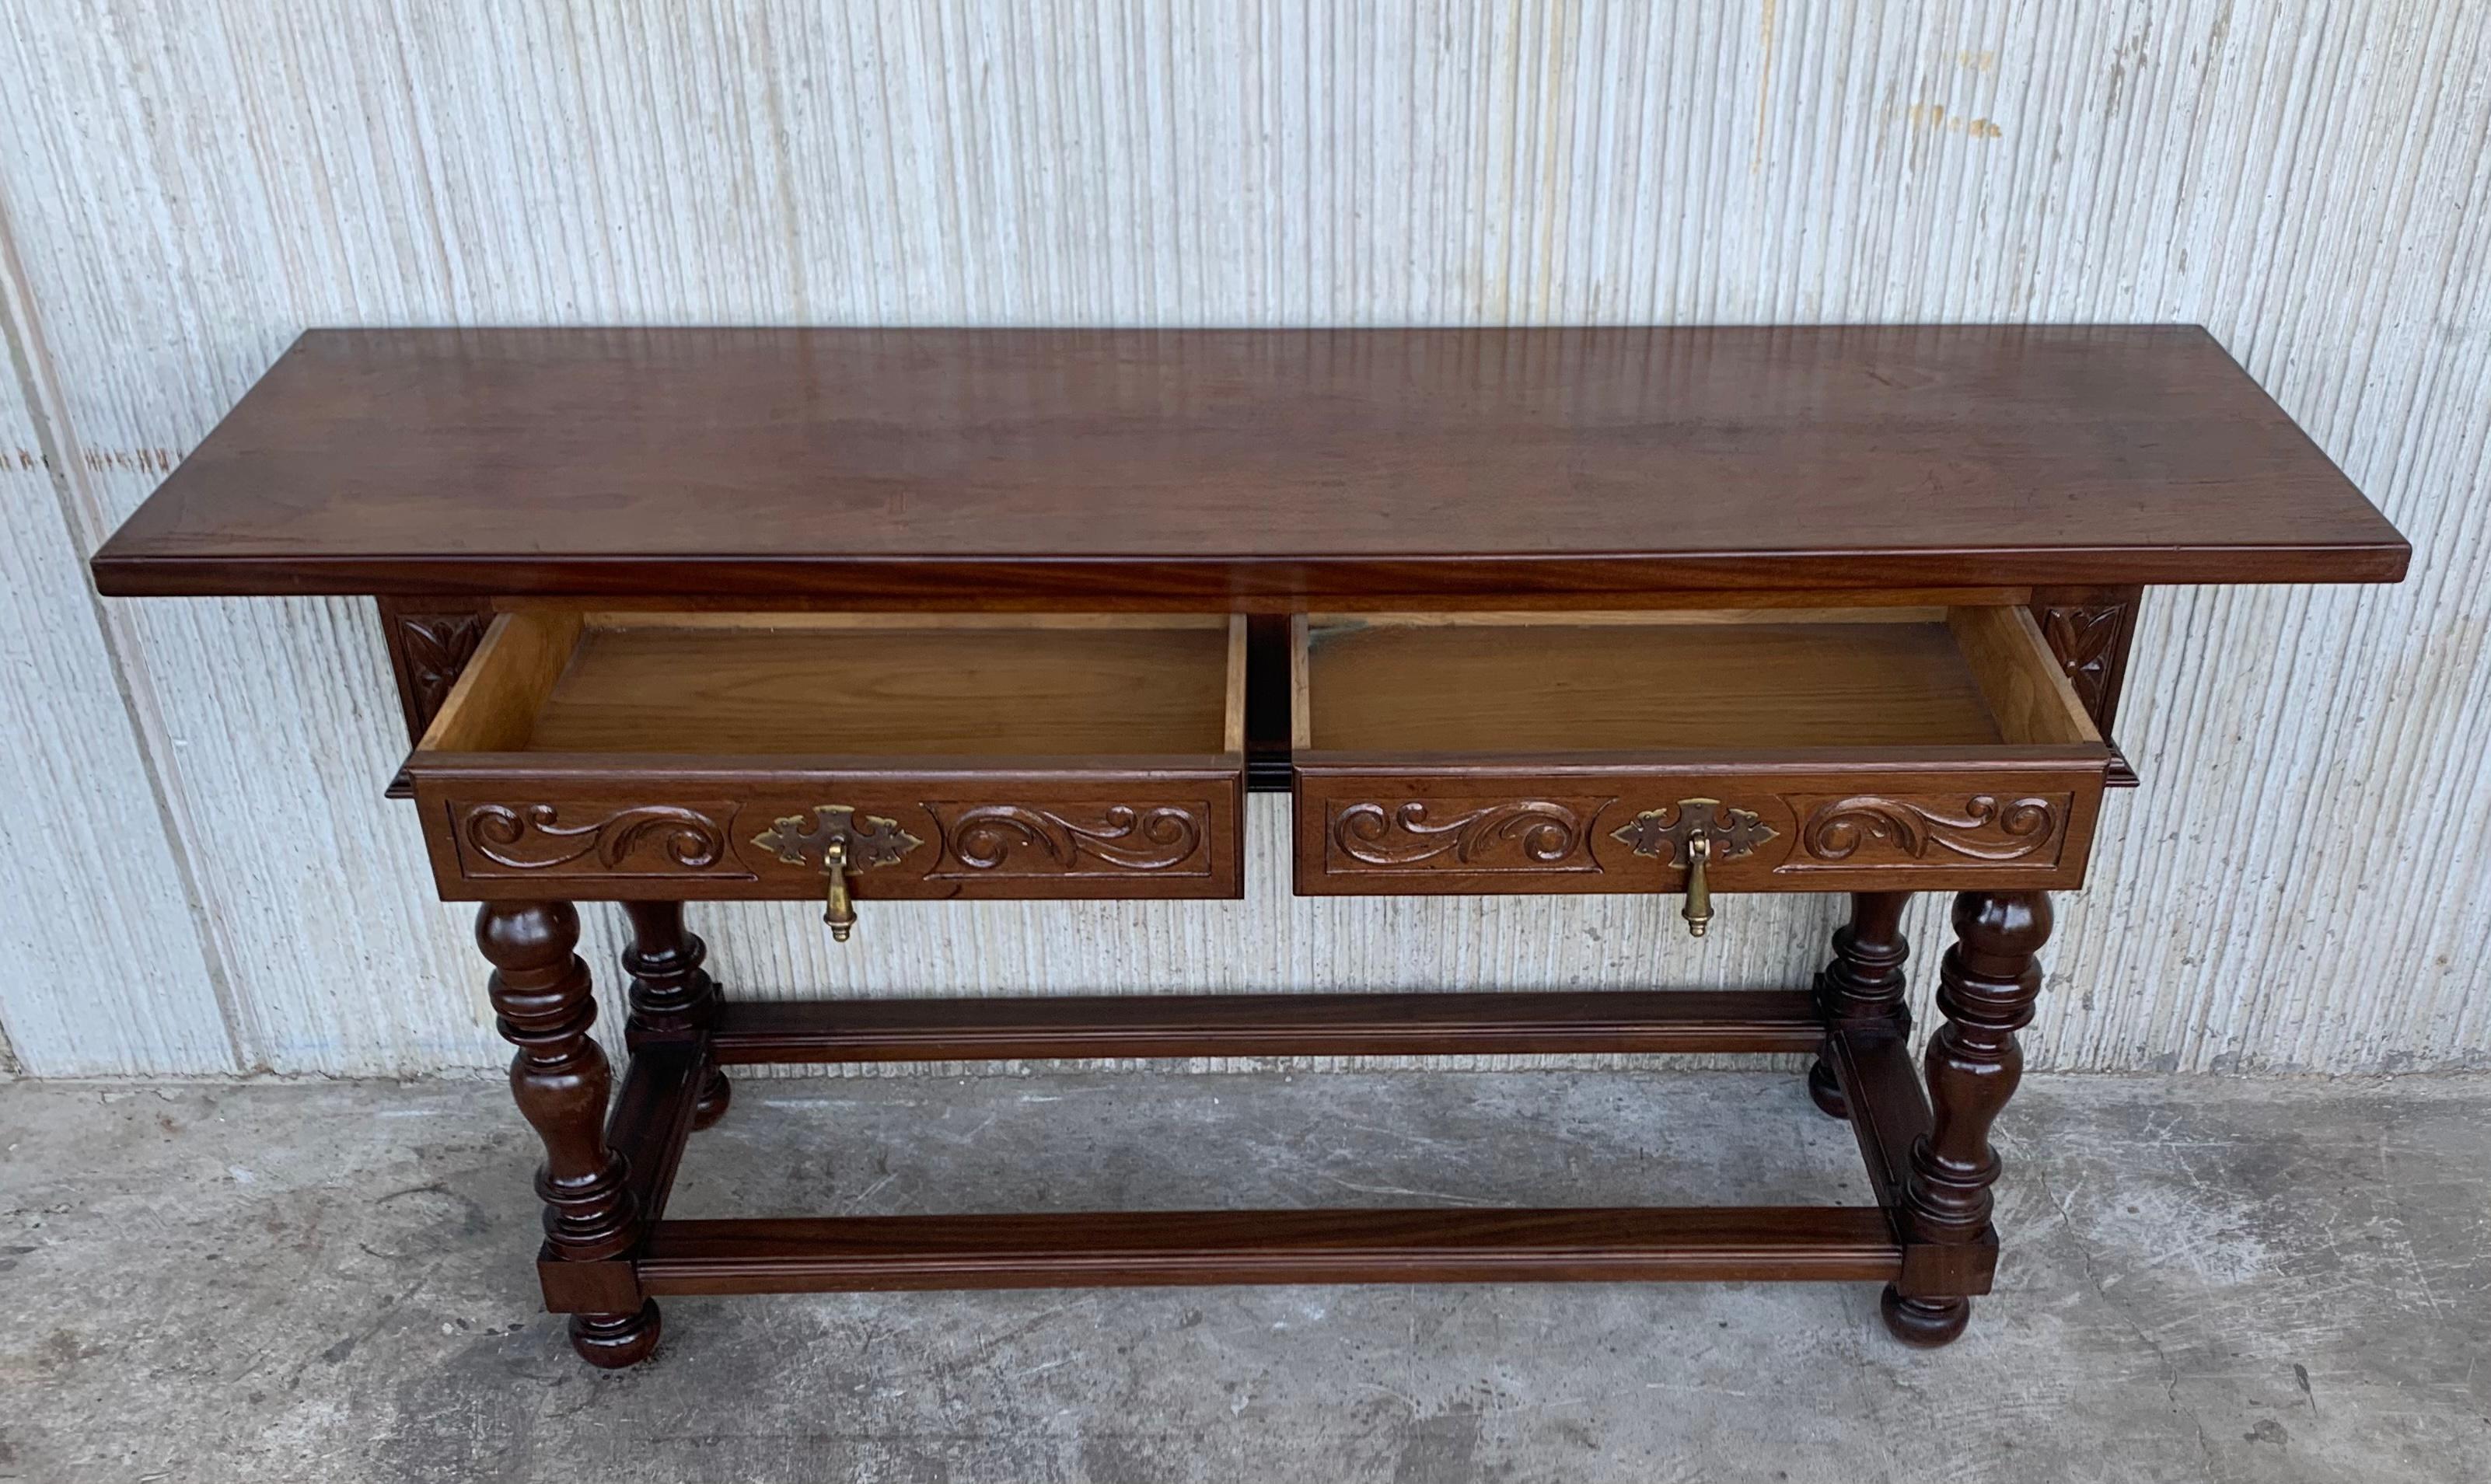 20th Century Spanish Tuscan Console Table with Two Drawers and Turned Legs 1